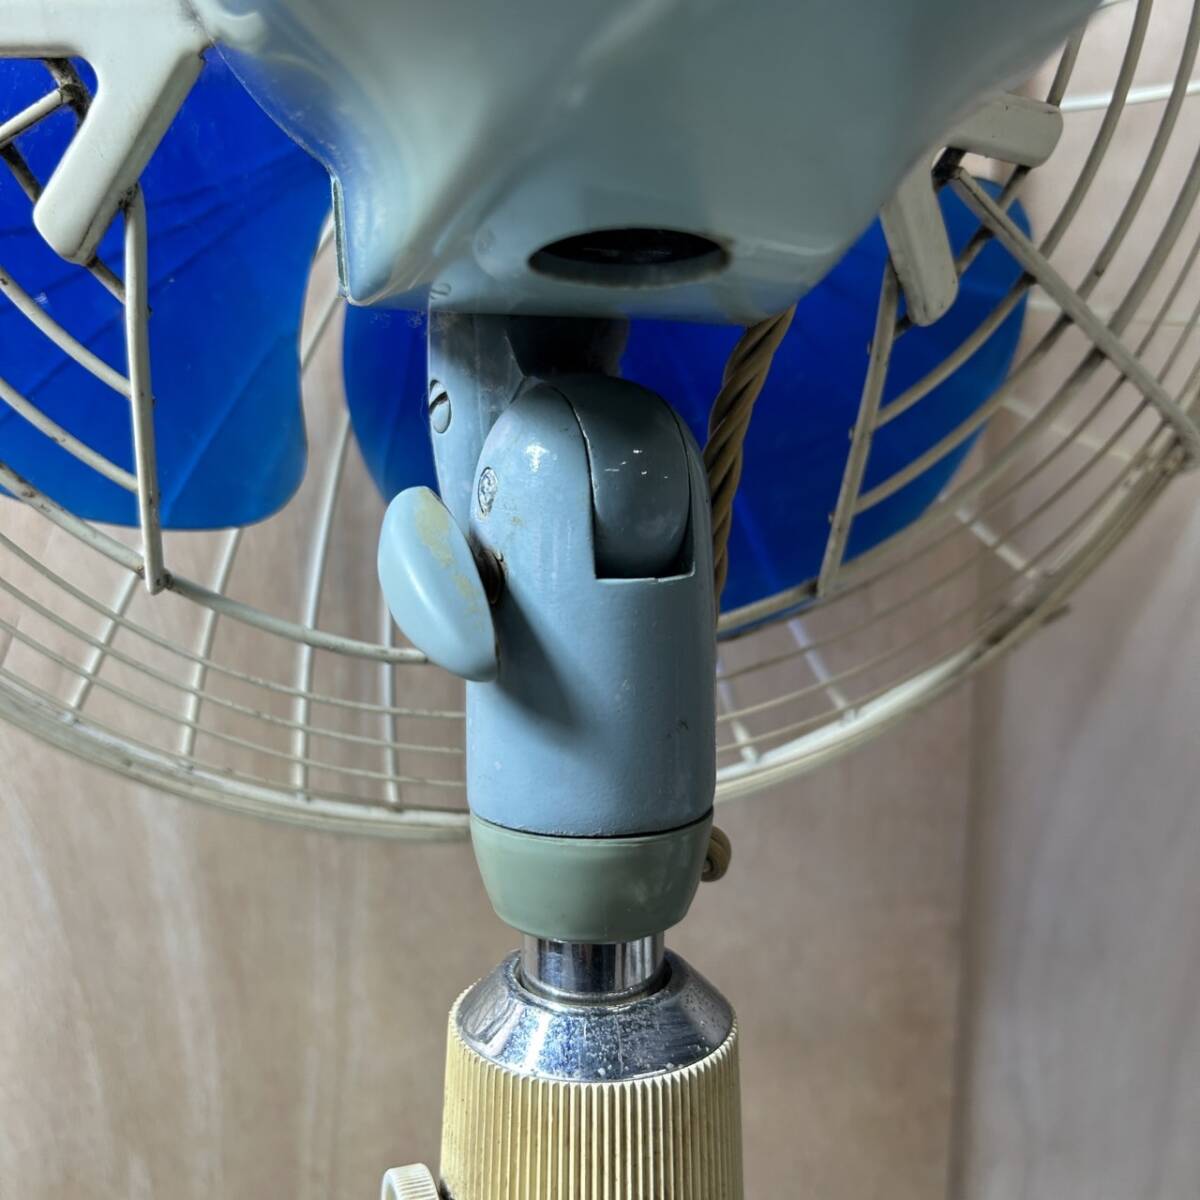 * operation goods TOSHIBA Toshiba electric fan HM series 30cm 4 sheets wings root blue Tokyo Shibaura electric consumer electronics electrical appliances antique Showa Retro ( secondhand goods / present condition goods / storage goods )*